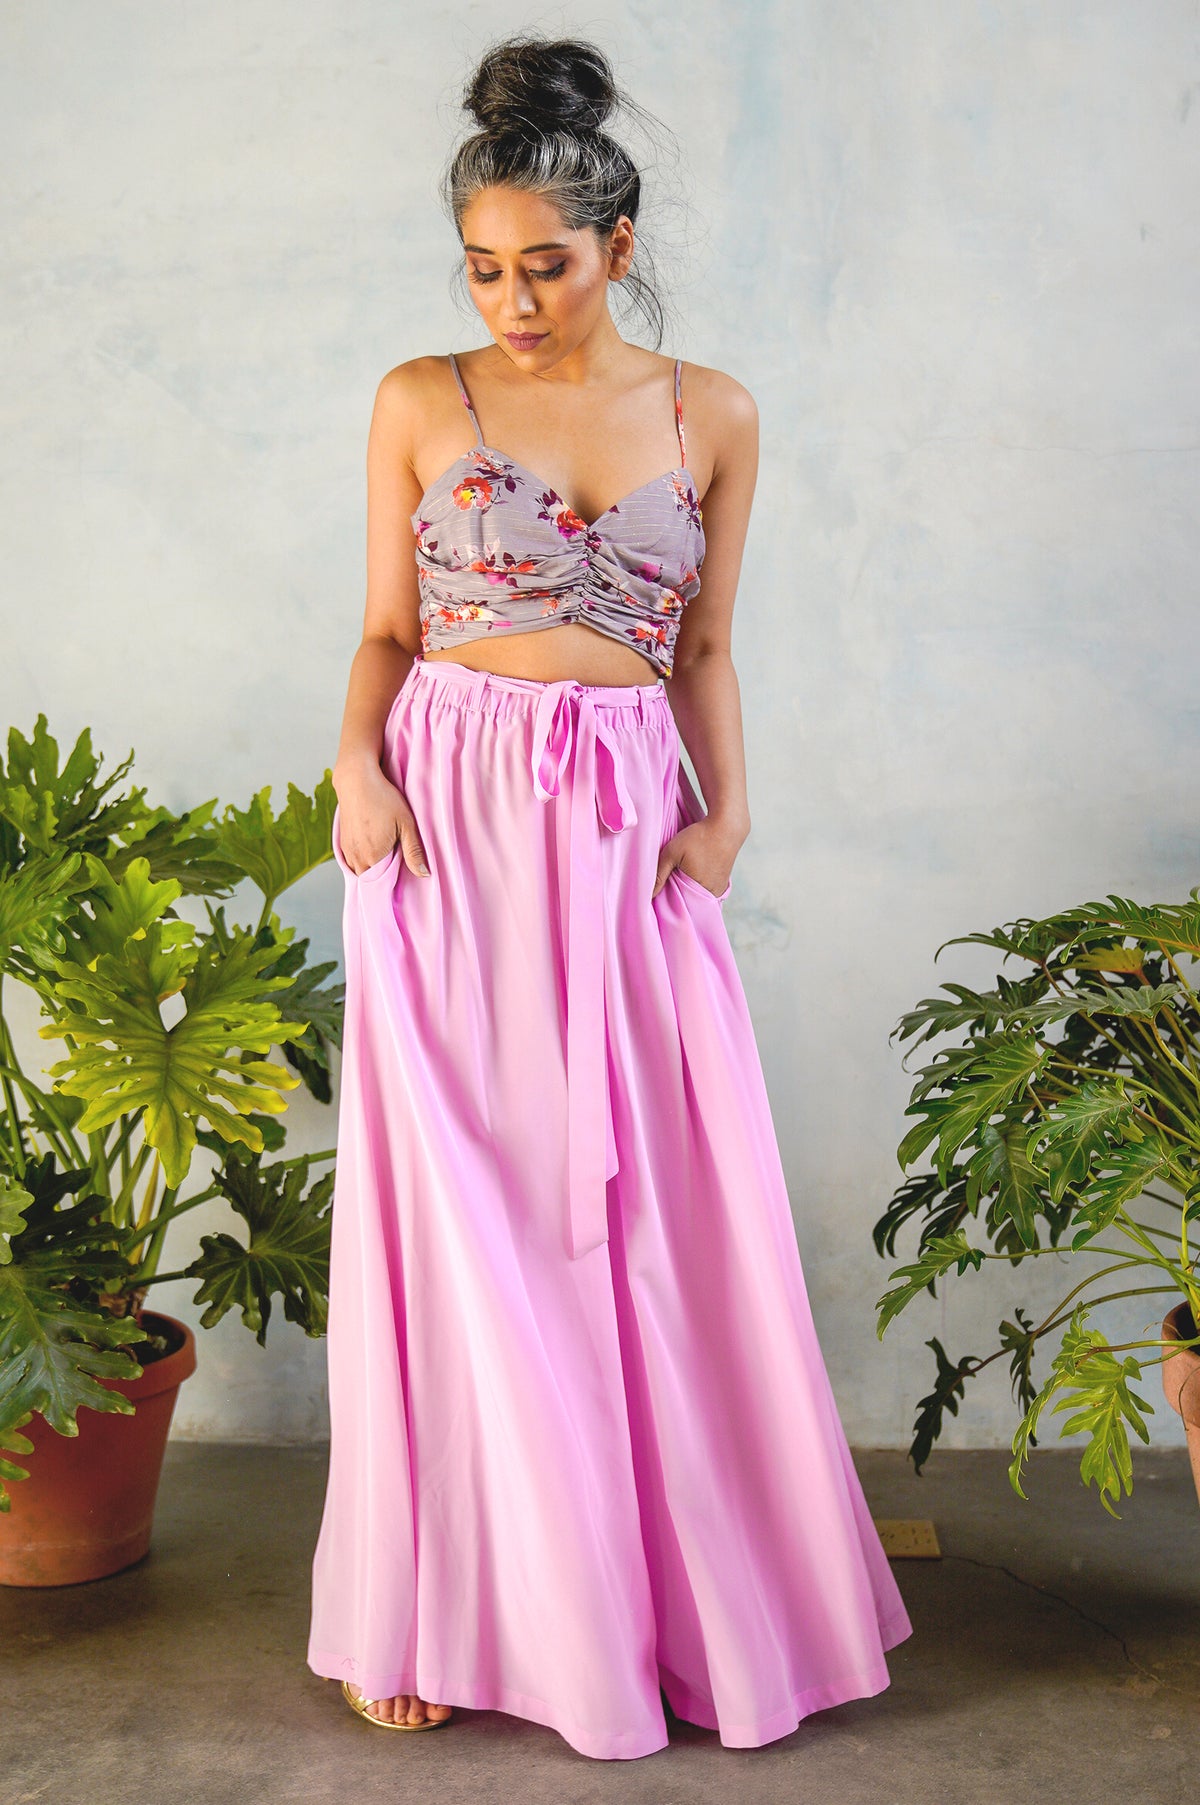 WIND Silk Pants with Tie Waist - Front View - Harleen Kaur - Ethically Made Womenswear